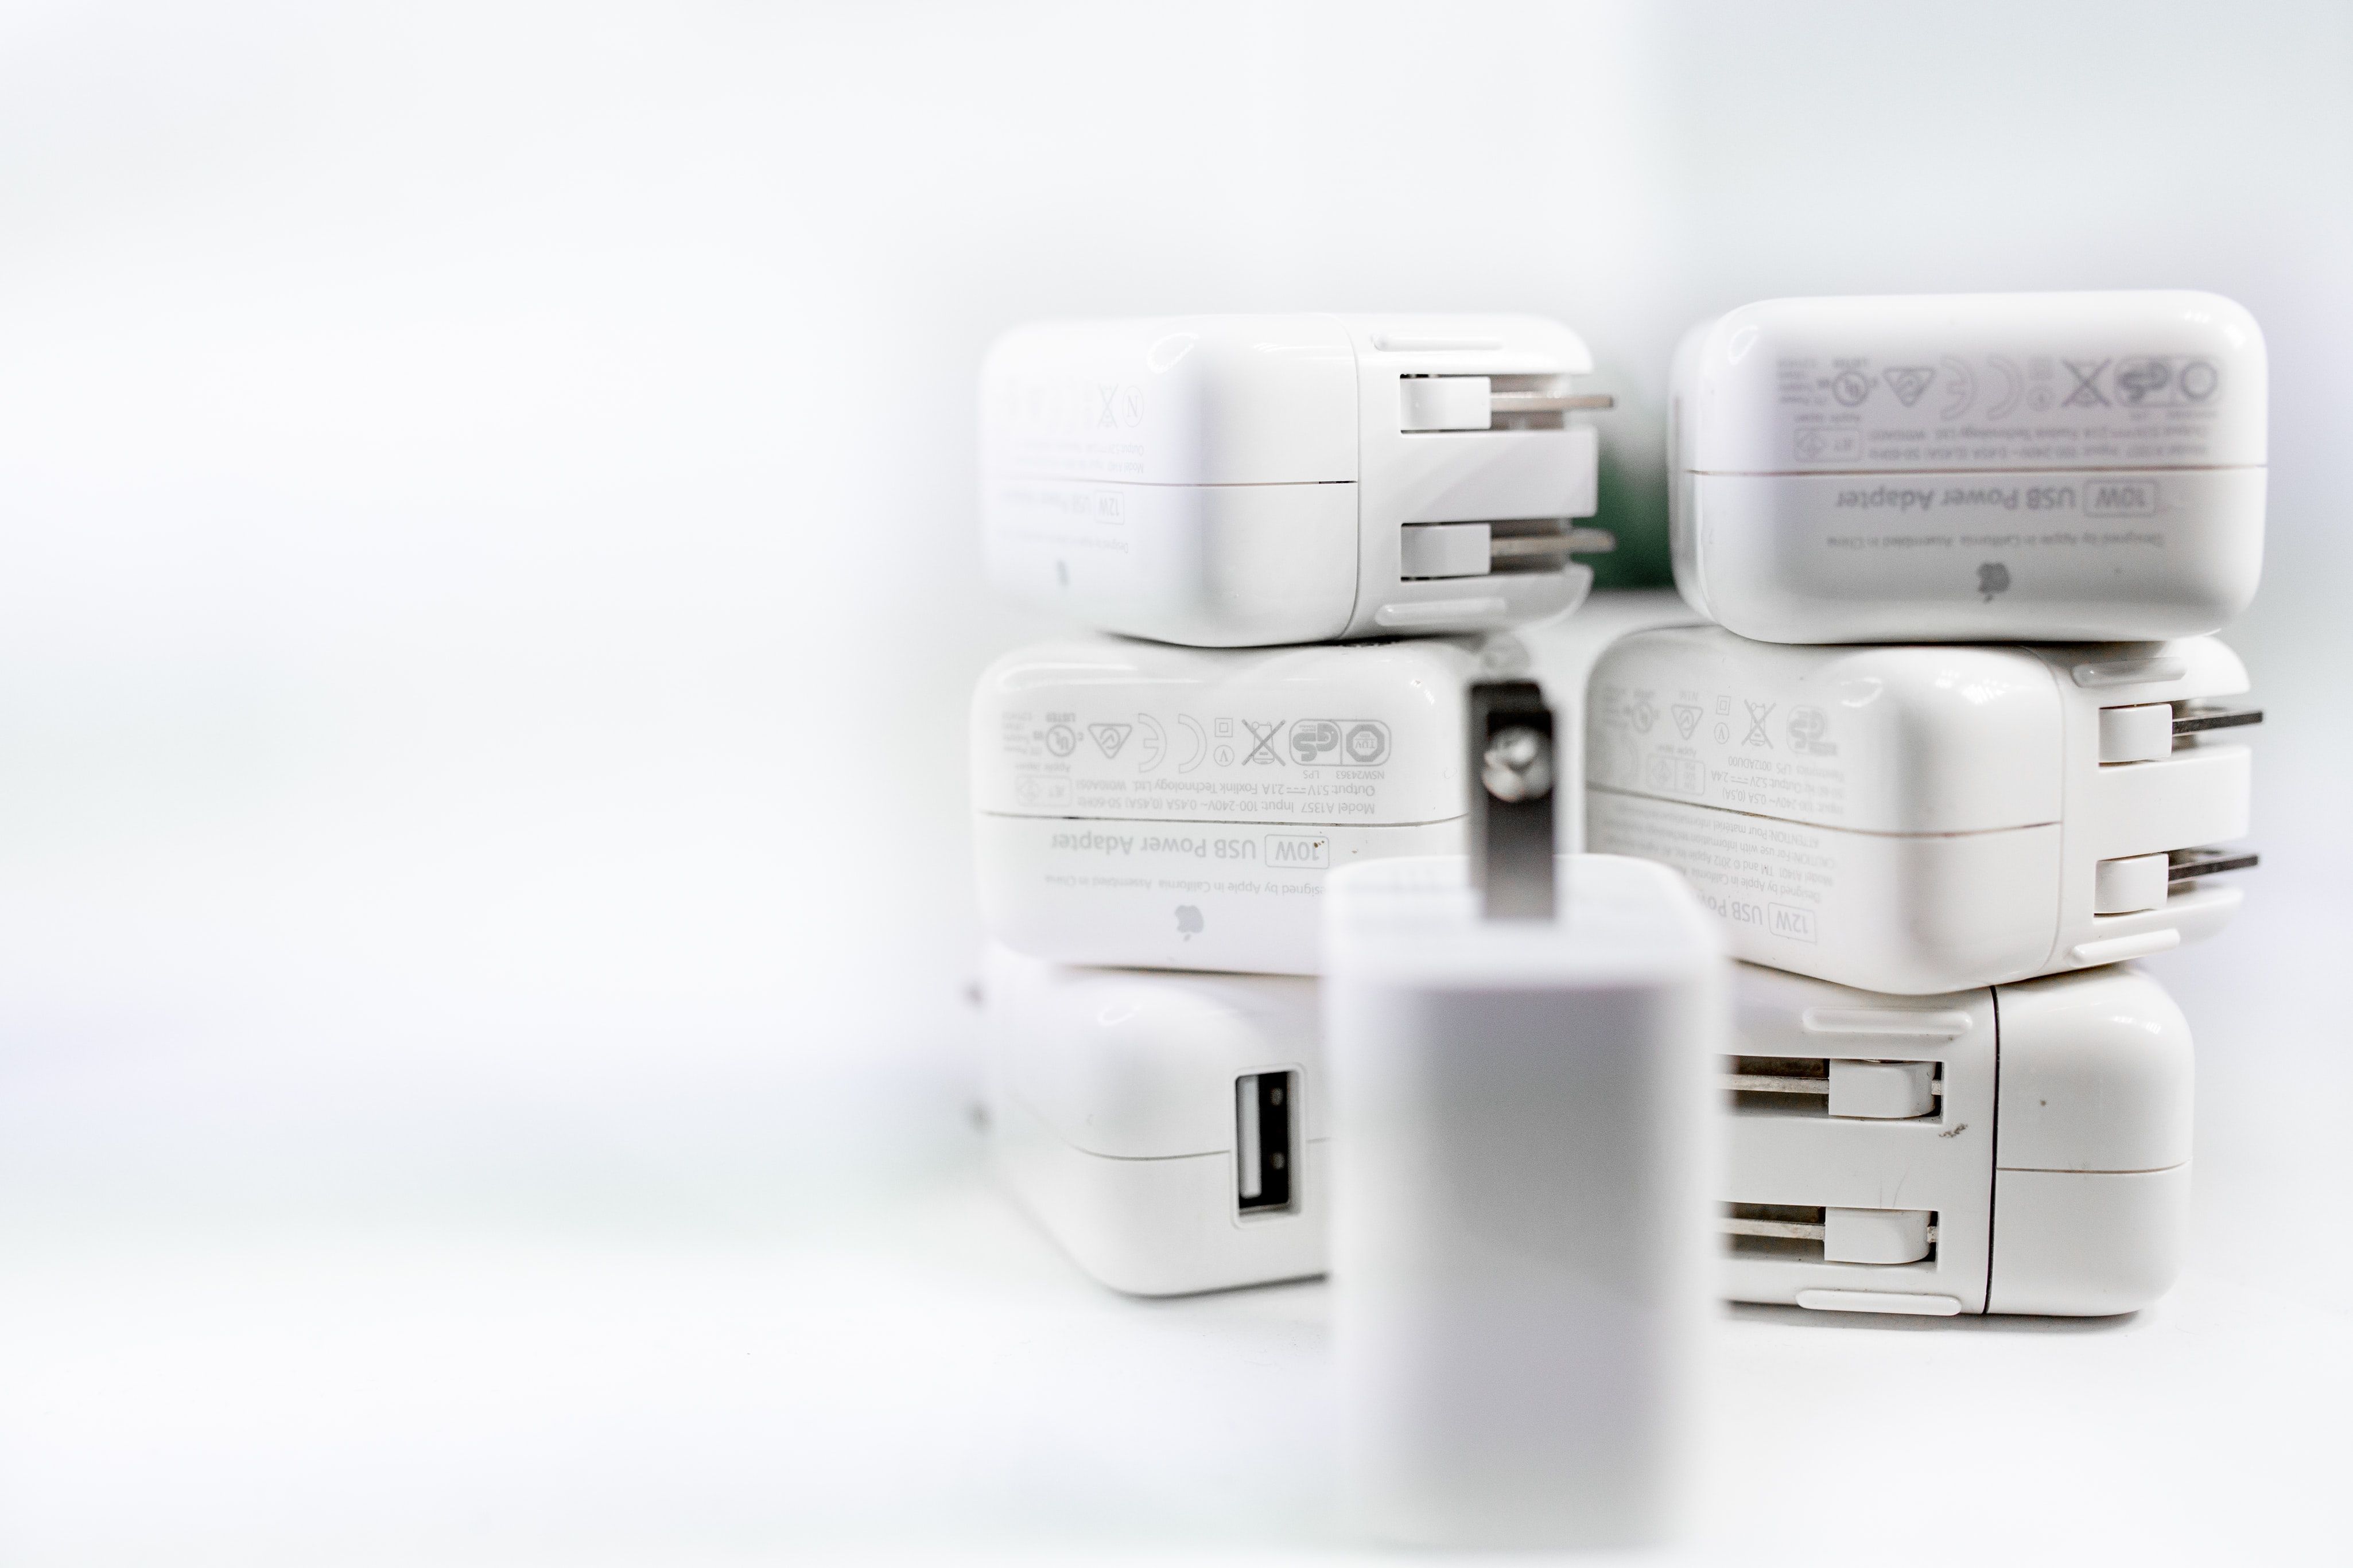 7 iPhone power adapters on a white surface